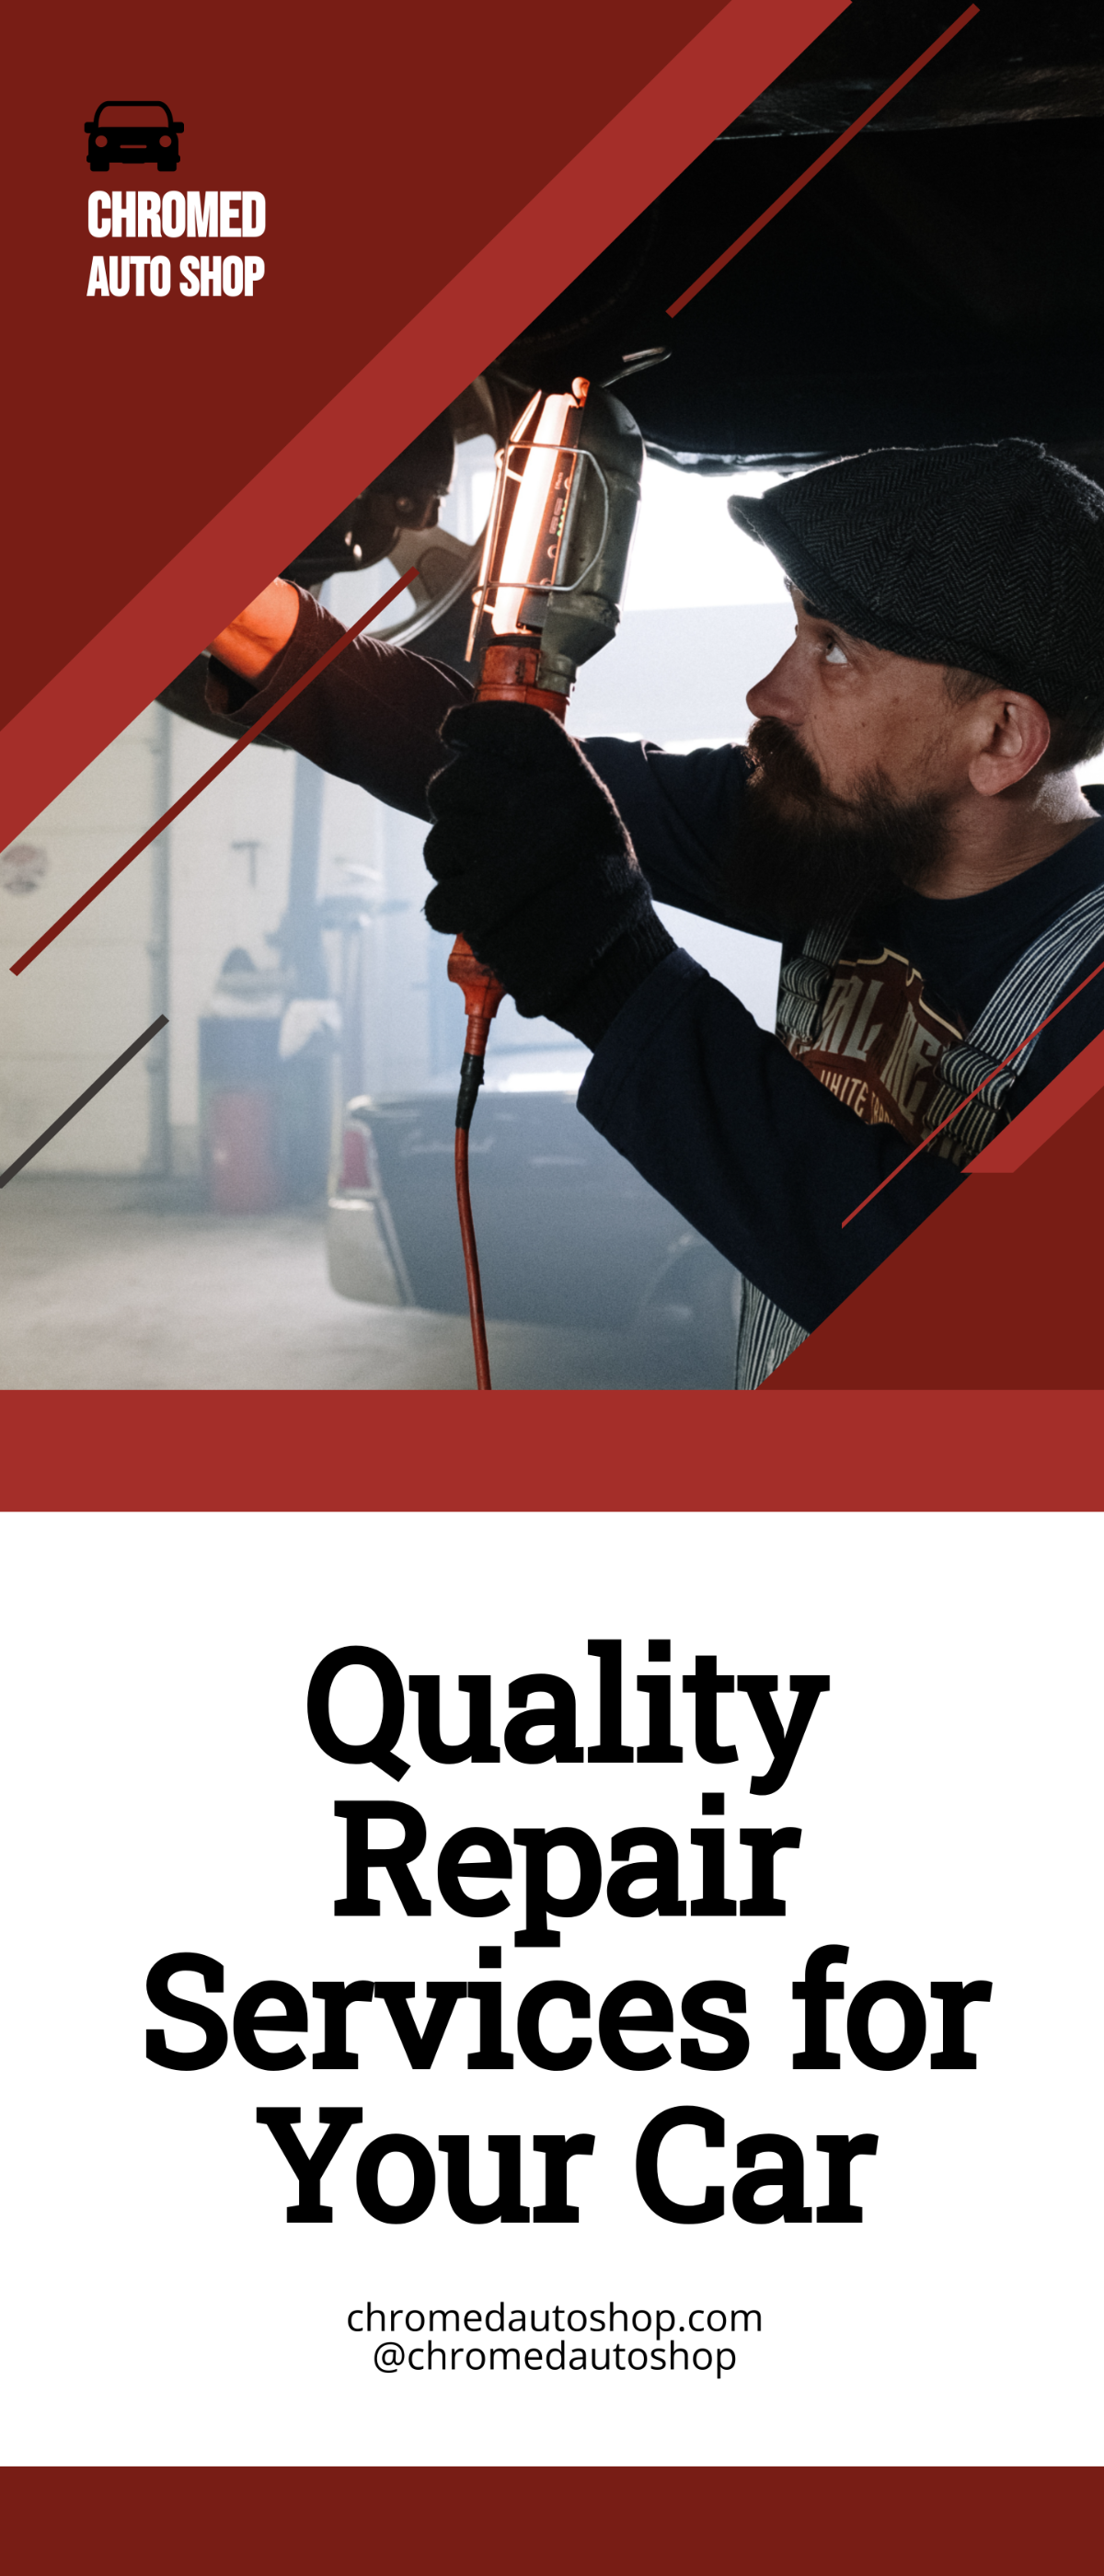 Car Auto Repair Service Roll-Up Banner Template